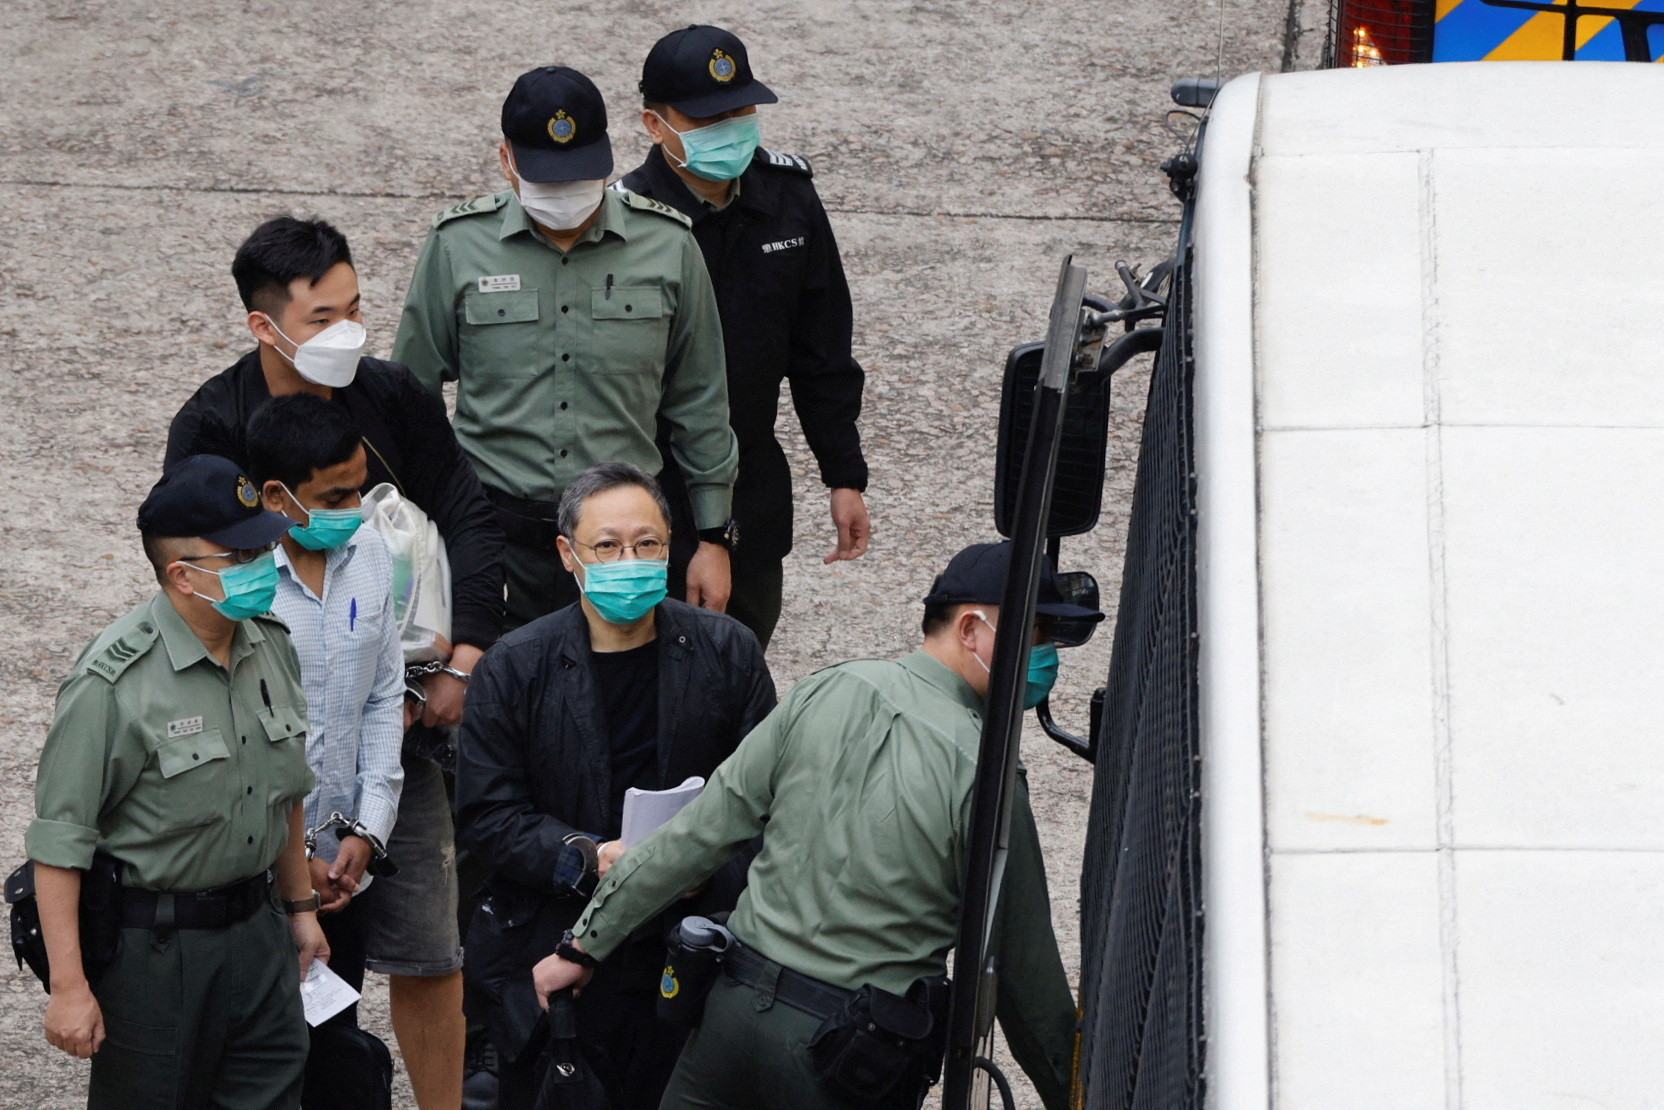 Pro-democracy activist Benny Tai walks to a prison van to head to court over the national security law charge, in the early morning, in Hong Kong